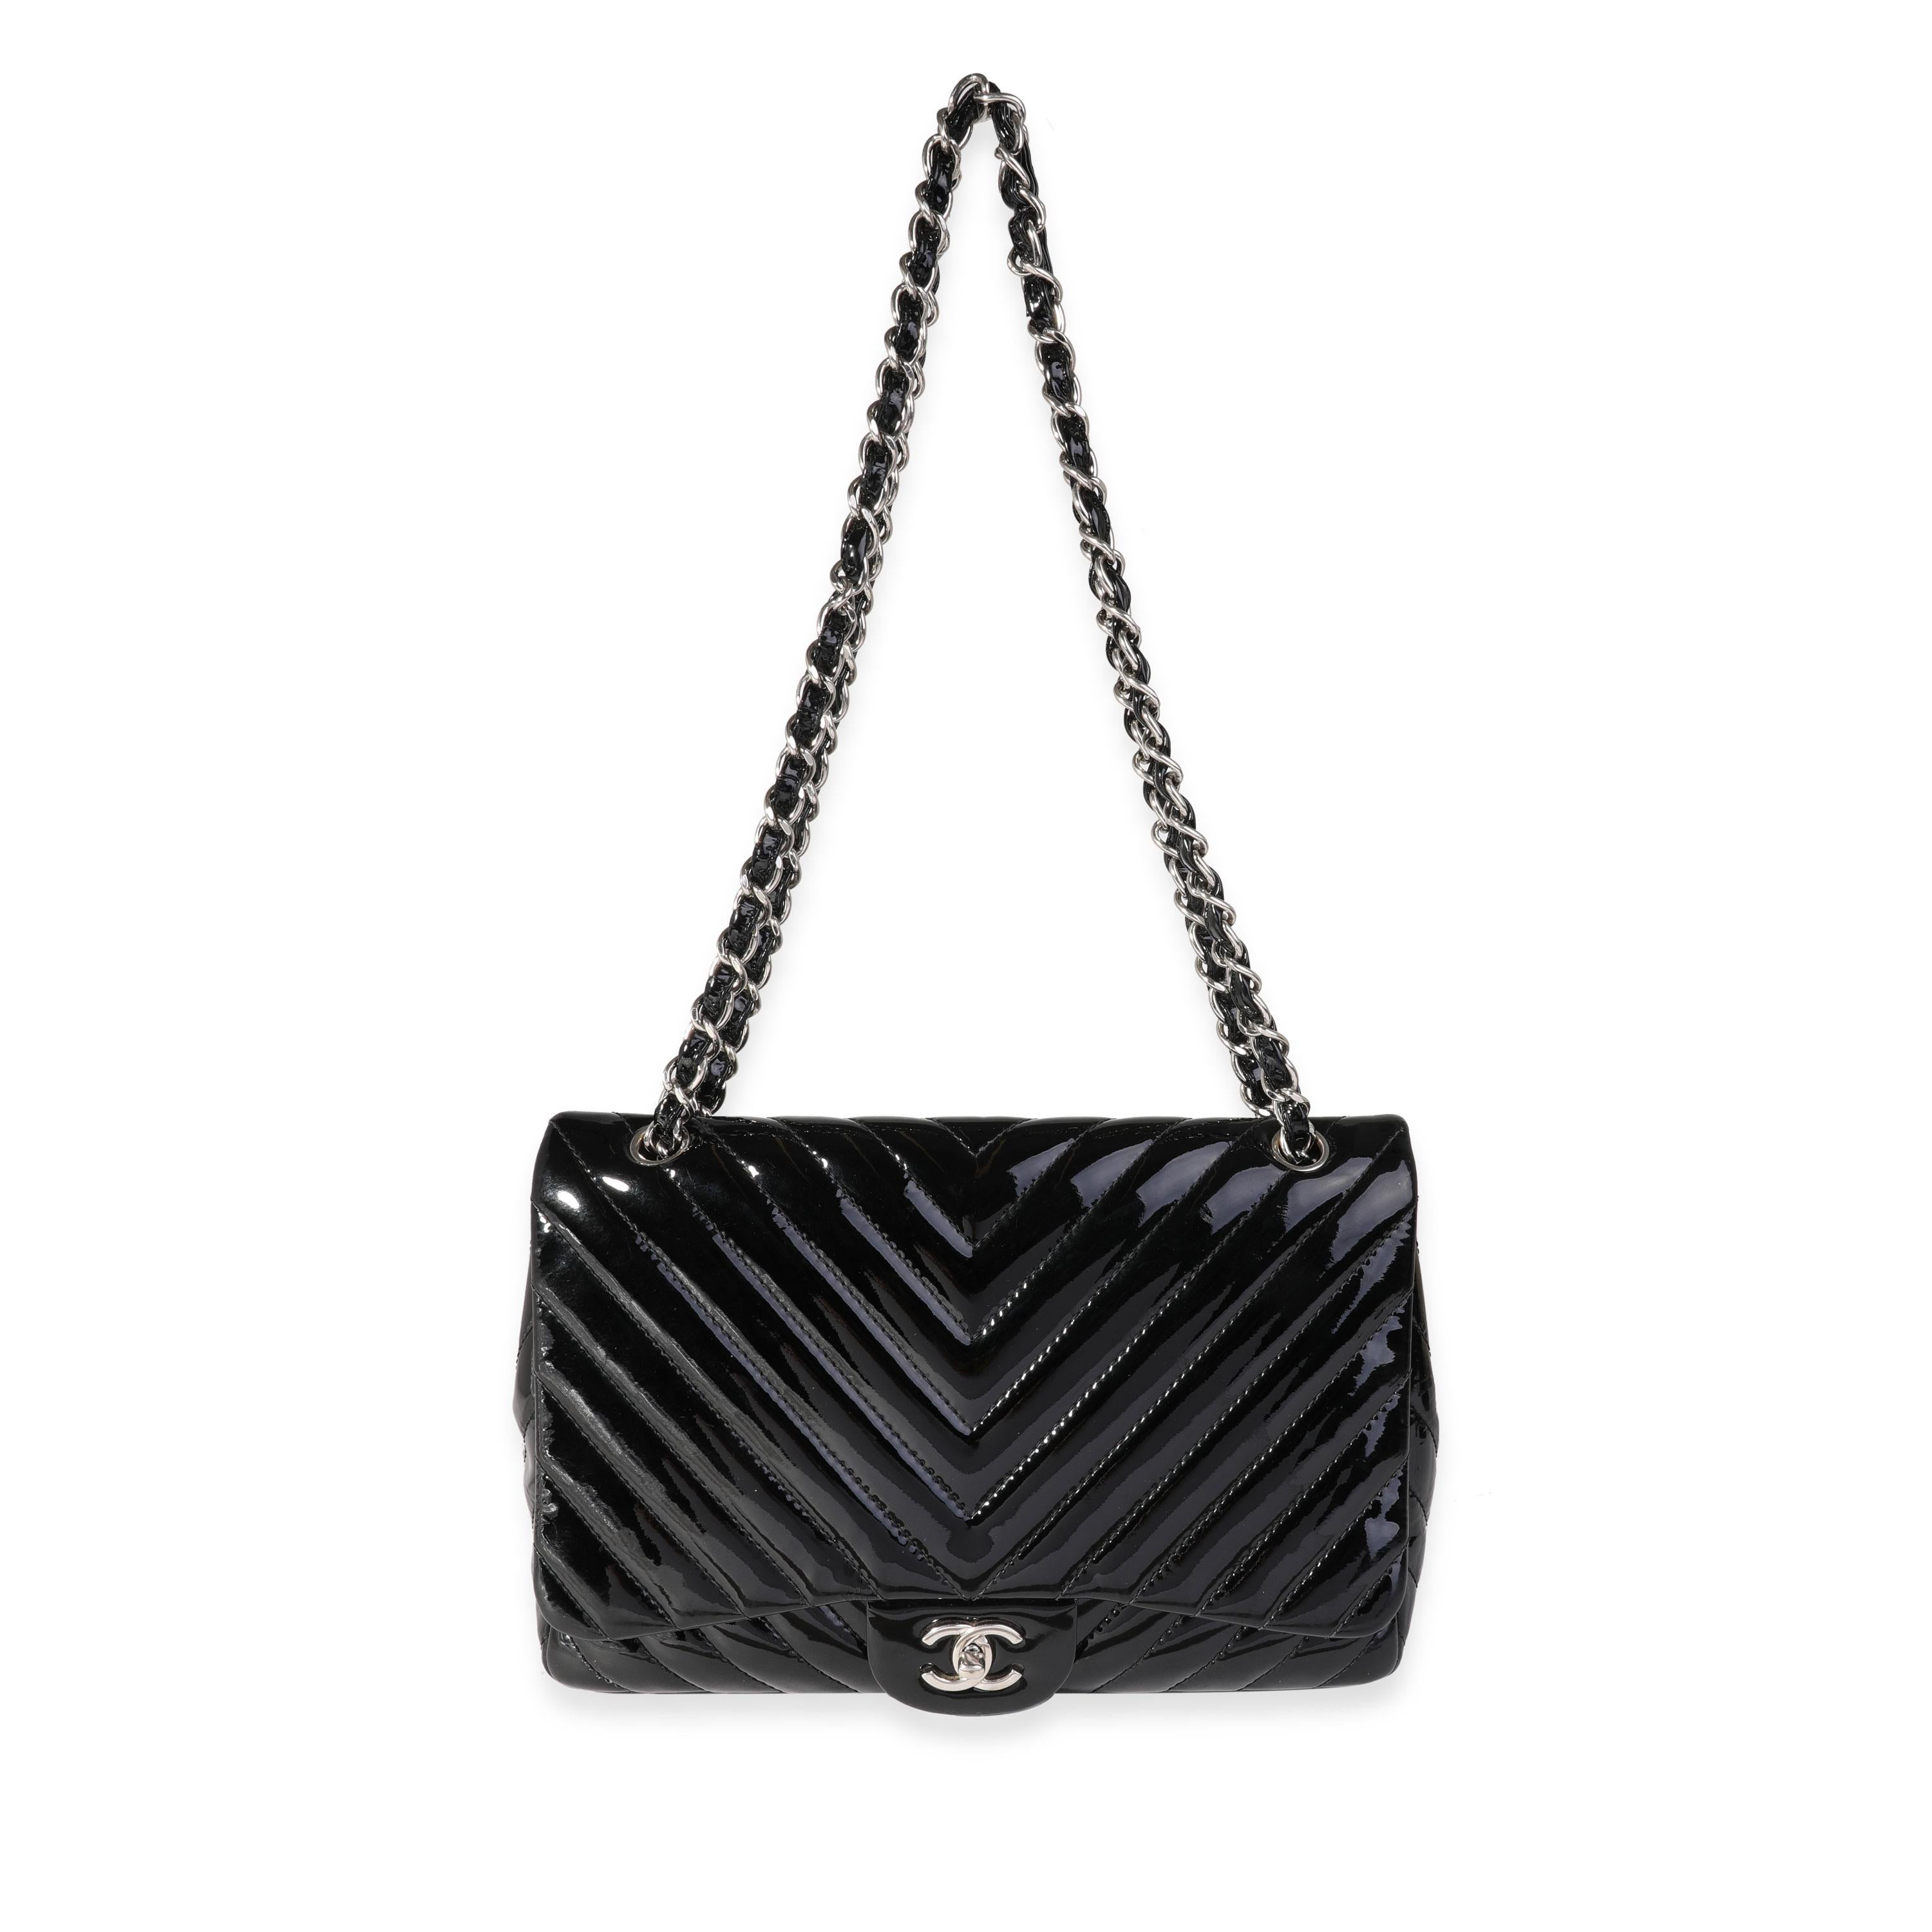 Listing Title: Chanel Black Chevron Quilted Patent Leather Jumbo Classic Single Flap Bag
SKU: 121674
MSRP: 9500.00
Condition: Pre-owned 
Handbag Condition: Very Good
Condition Comments: Very Good Condition. Wear to patent leather at corners. Marks